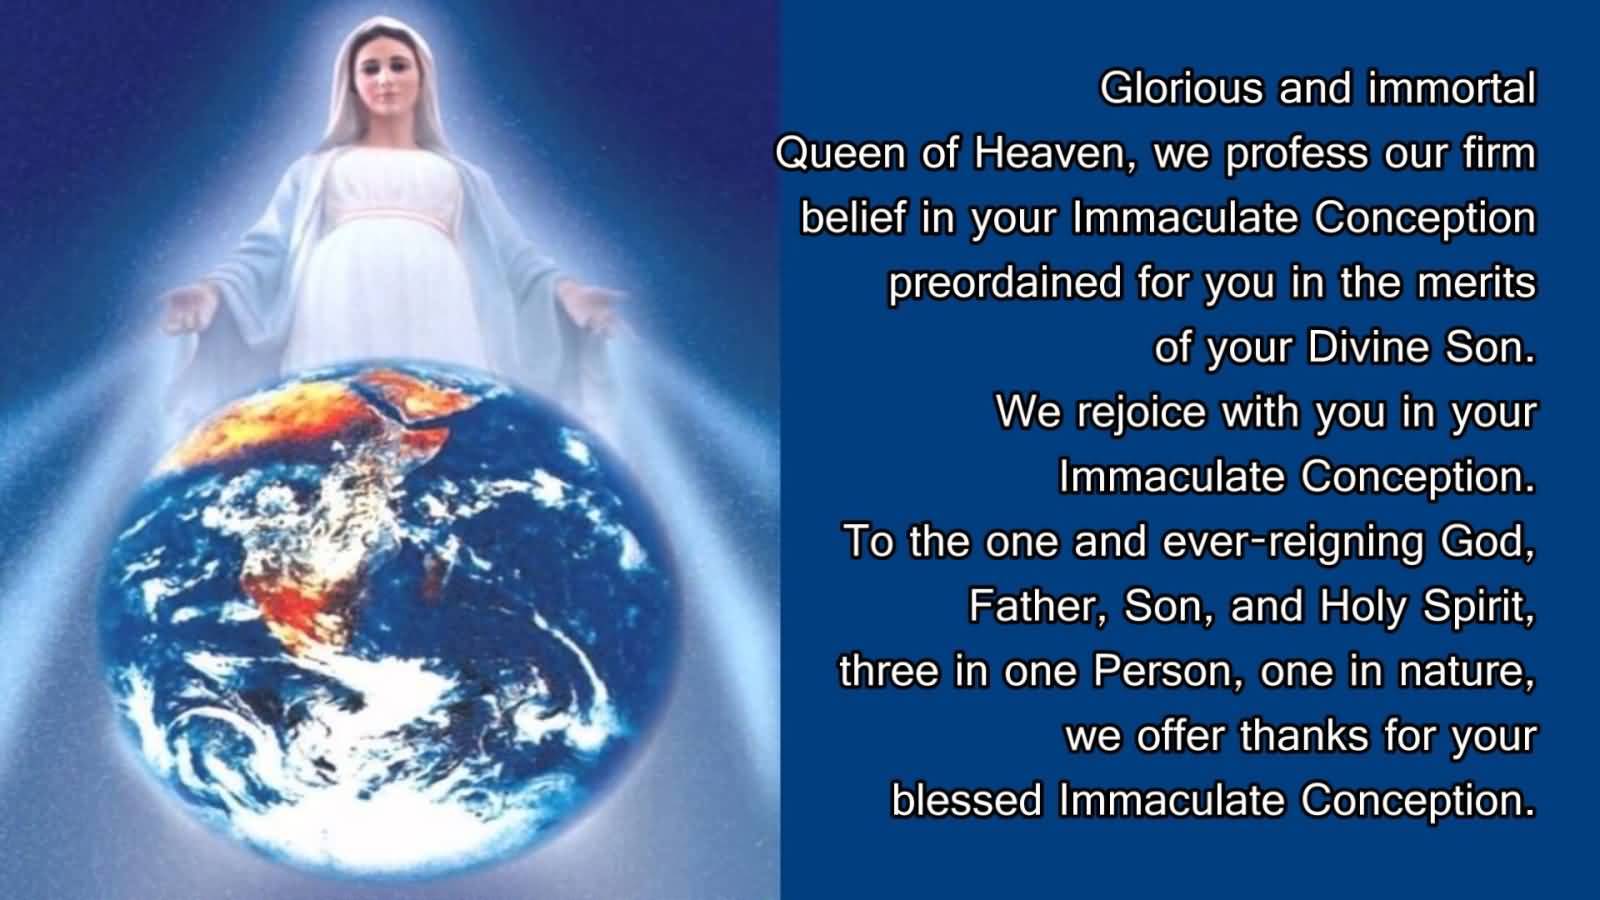 We Offer Thanks For Your Blessed Immaculate Conception